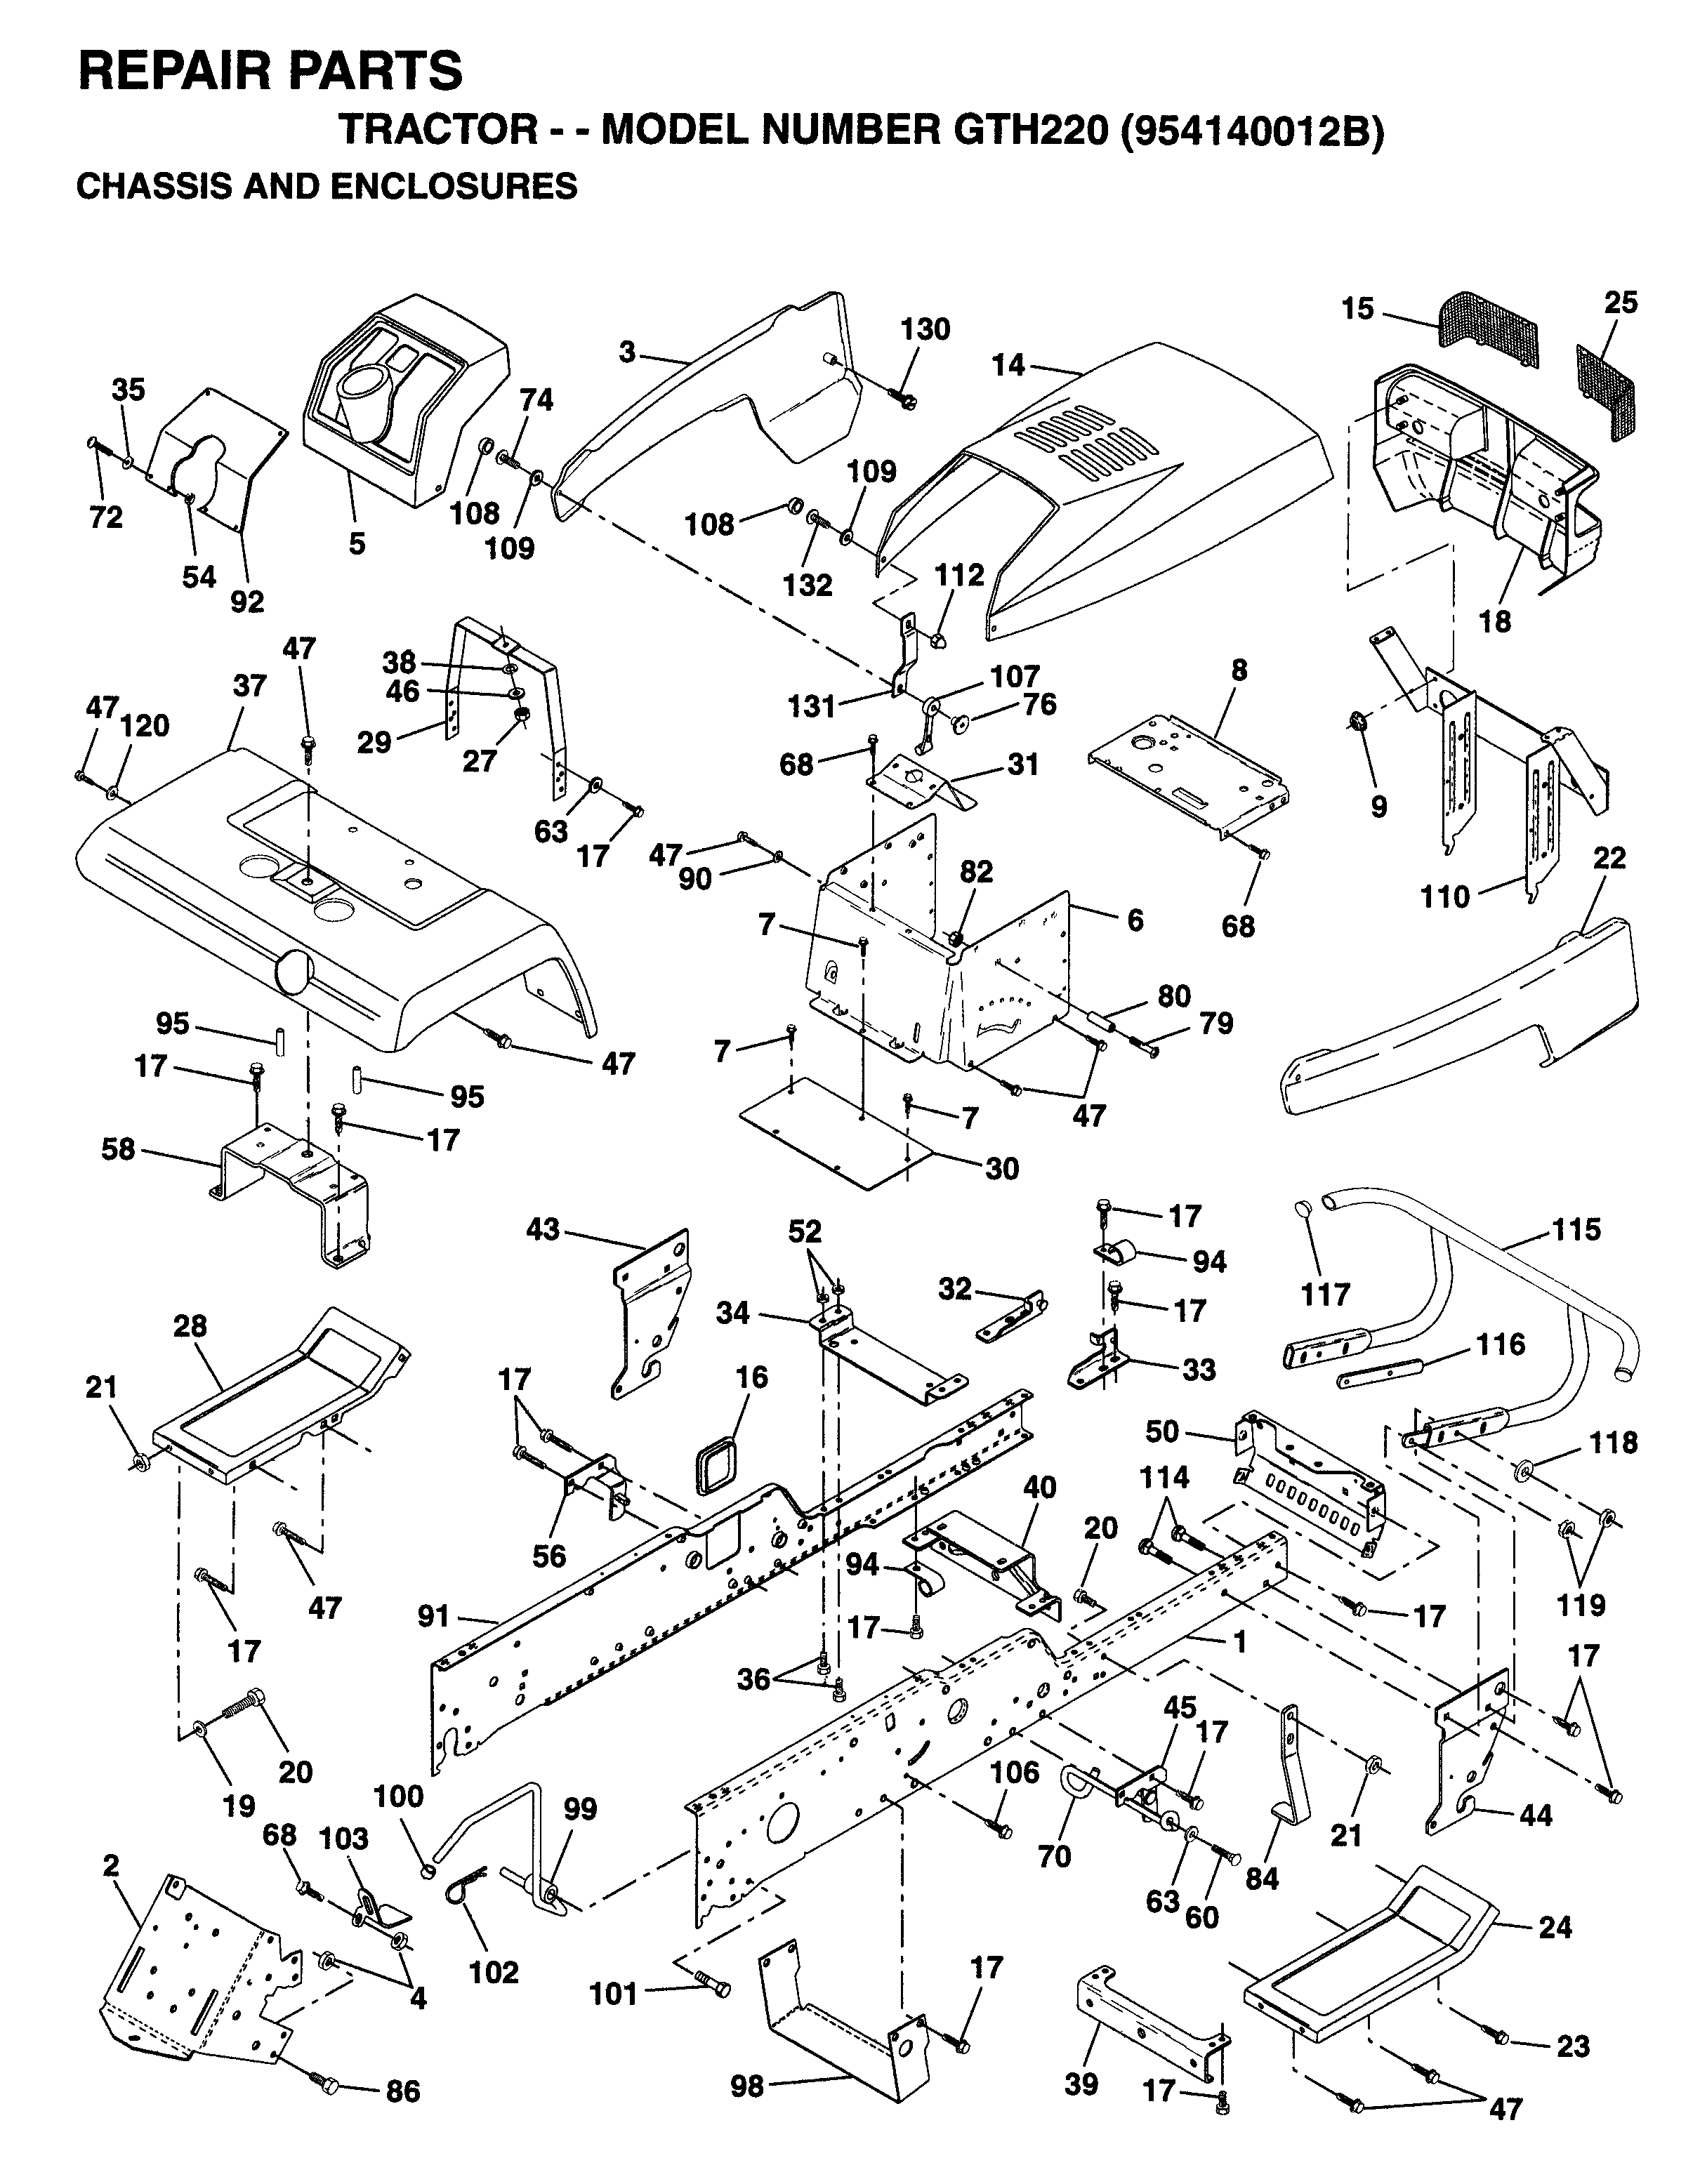 Chassis and appendix 532180375, 532140506, 532150478, 873800700, 532140452, 532157882, 596437001, 532185518, 532108067, 532150477, 532157068, 532121794, 817490612, 532157236, 734117201, 874760616, 596322601, 532150479, 817490616, 532147202, 532157069, 532050675, 532147203, 532145205, 532145052, 532145183, 532141315, 532141314, 532142131, 734116301, 596030501, 532140002422, 596029801, 532175278, 532156111, 532136939, 532136940, 532154913, 734115441, 596564001, 532152728, 596040501, 596040501, 532154914, 532137113, 817490620, 819131614, 596030701, 532177679, 874180512, 871191008, 596987401, 874981024, 532007206, 873271000, 532142992, 874760716, 596238701, 532180374, 532157221, 532100207, 532105531, 532175847, 532140871, 532124236, 599972501, 532004497, 532142273, 584953901, 532109808, 532110356, 532110357, 532150200, 539108086, 583611601, 532141461, 532143679, 734117201, 596322601, 596140201, 817521312, 532150195, 874291006, 532008022